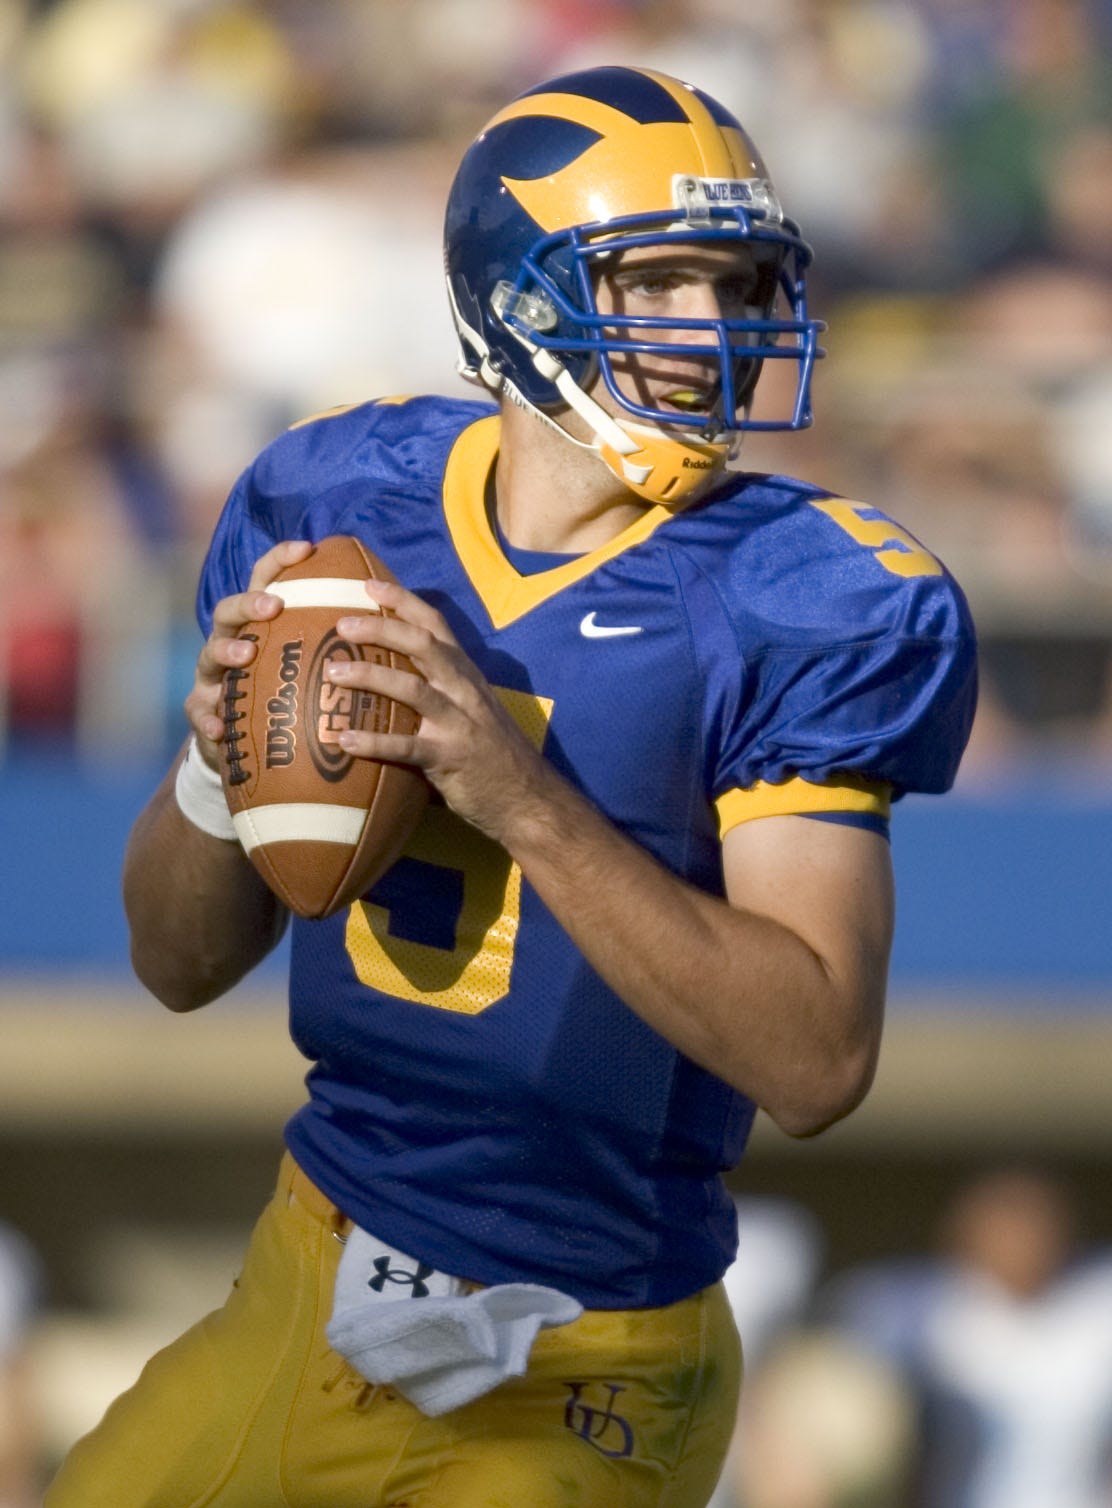 From the archives: Joe Flacco at University of Delaware